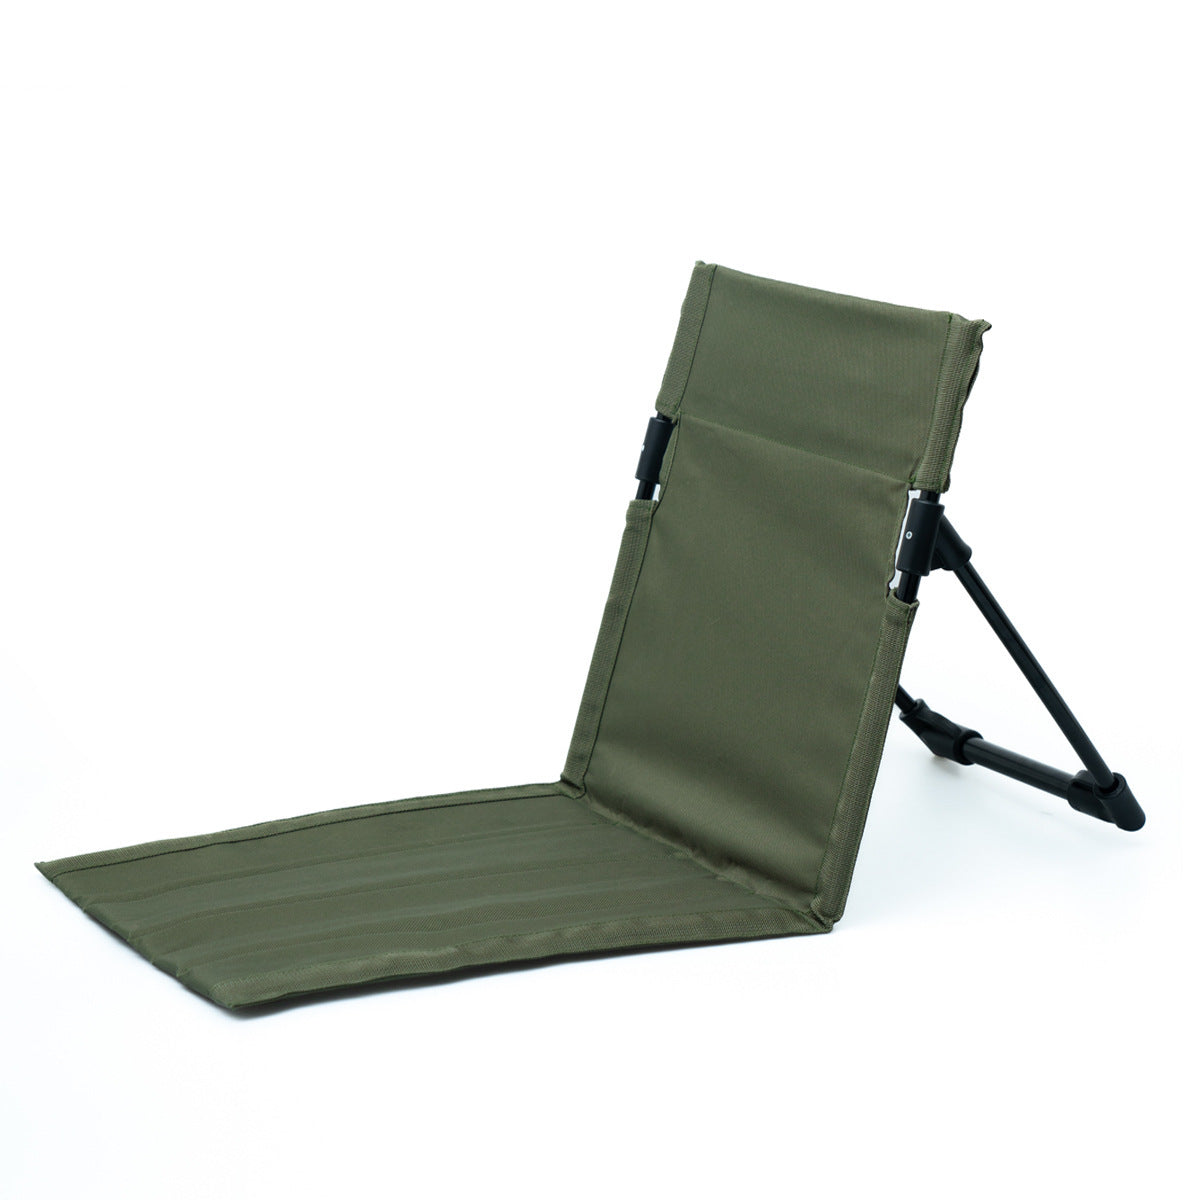 Outdoor Camping Lightweight And Comfortable Foldable Chair